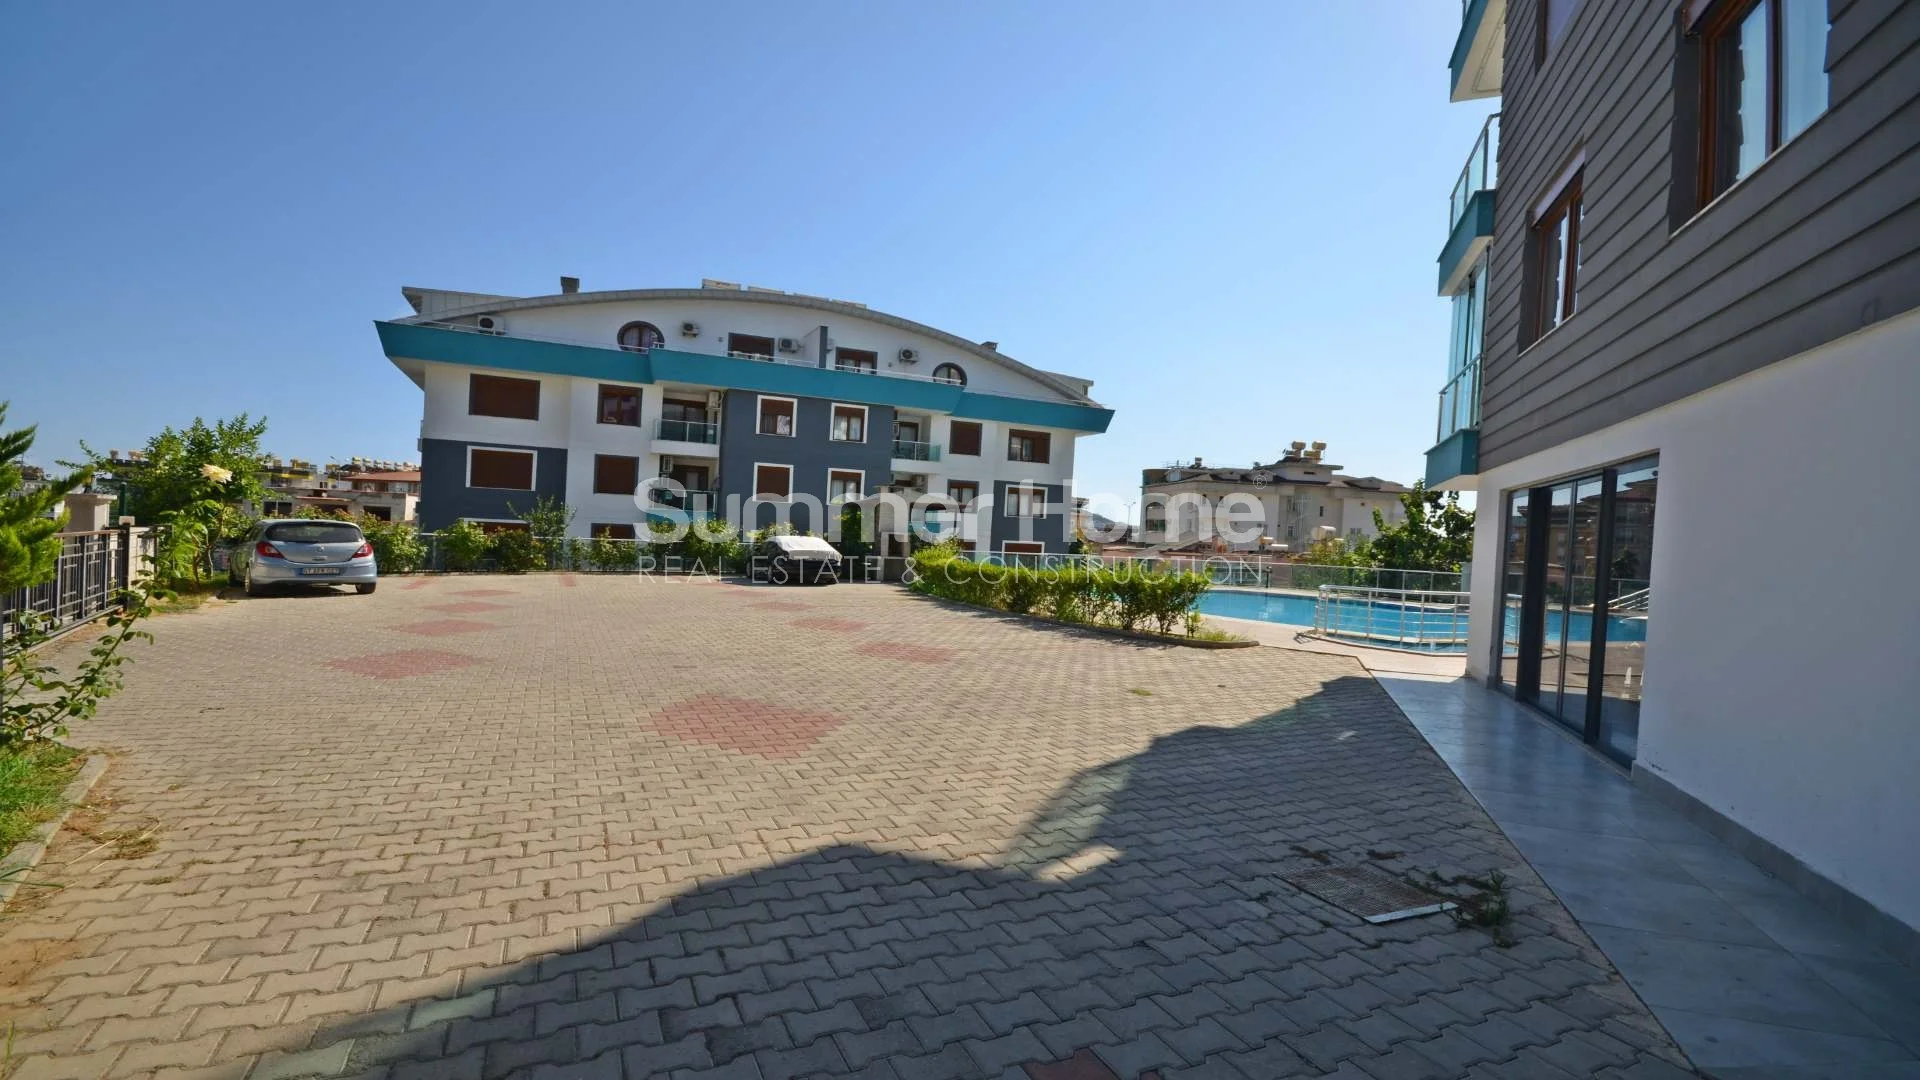 For sale Apartment Alanya Hasbahce general - 3